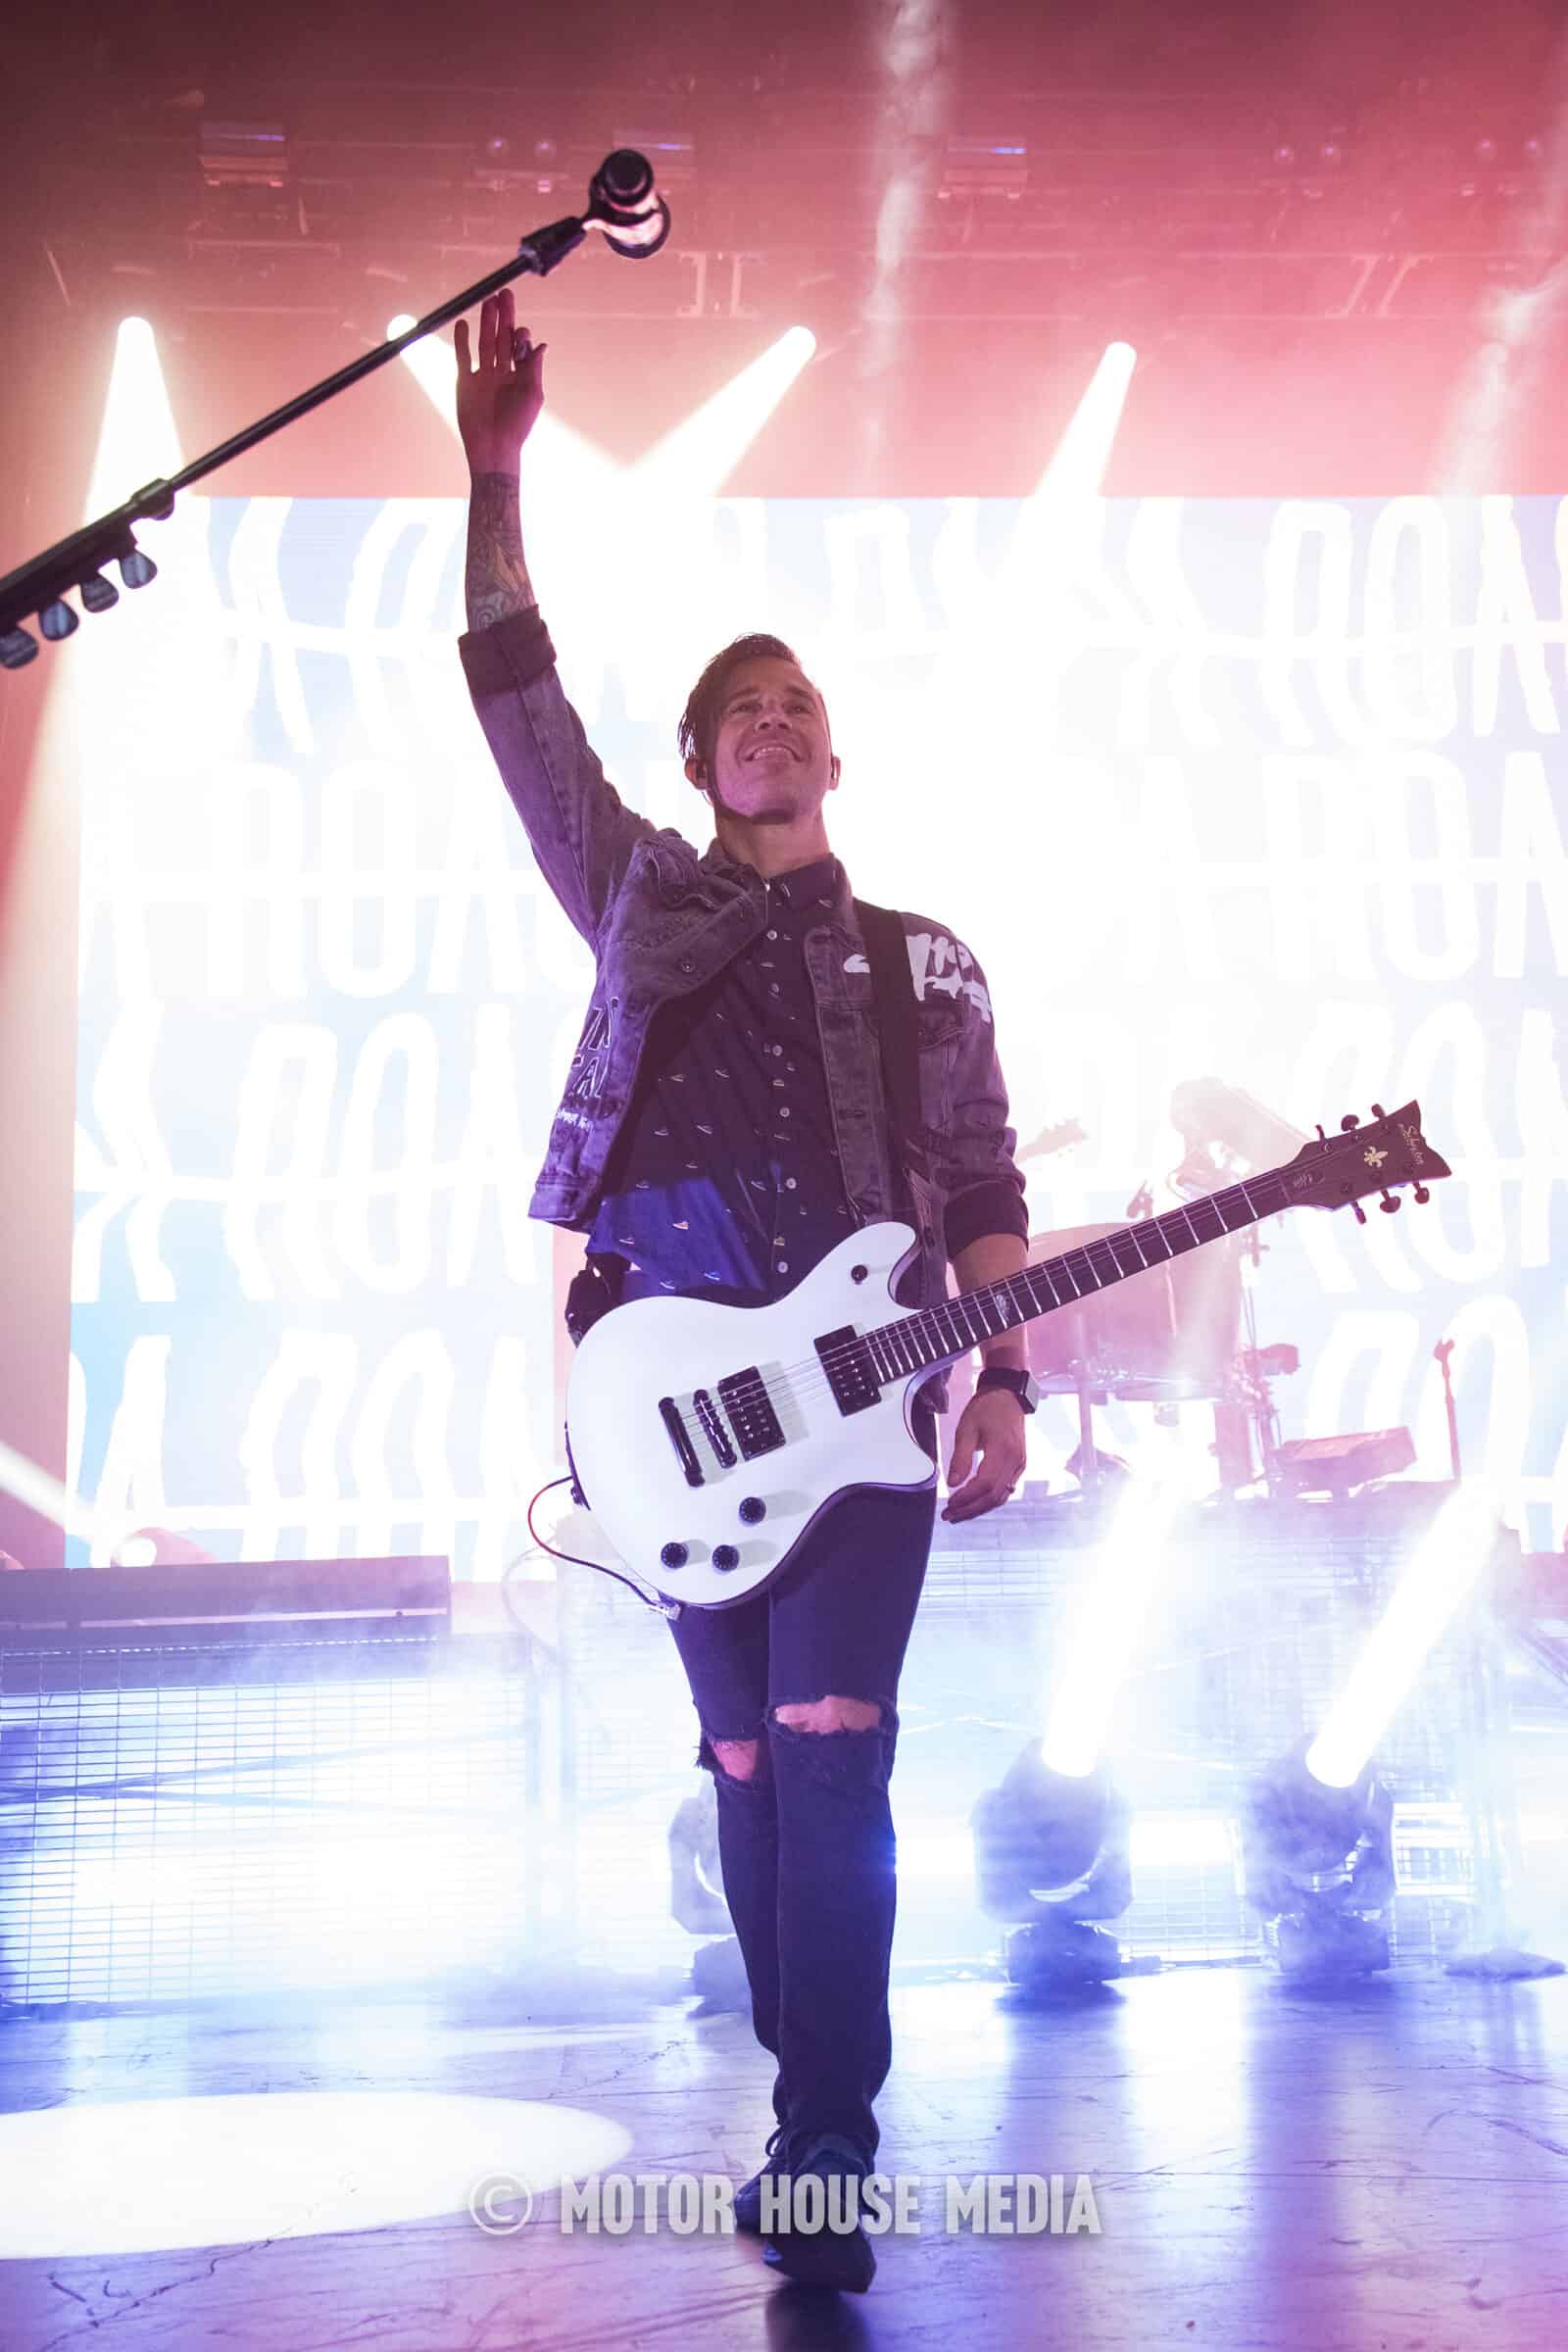 Jerry Horton waving to fans